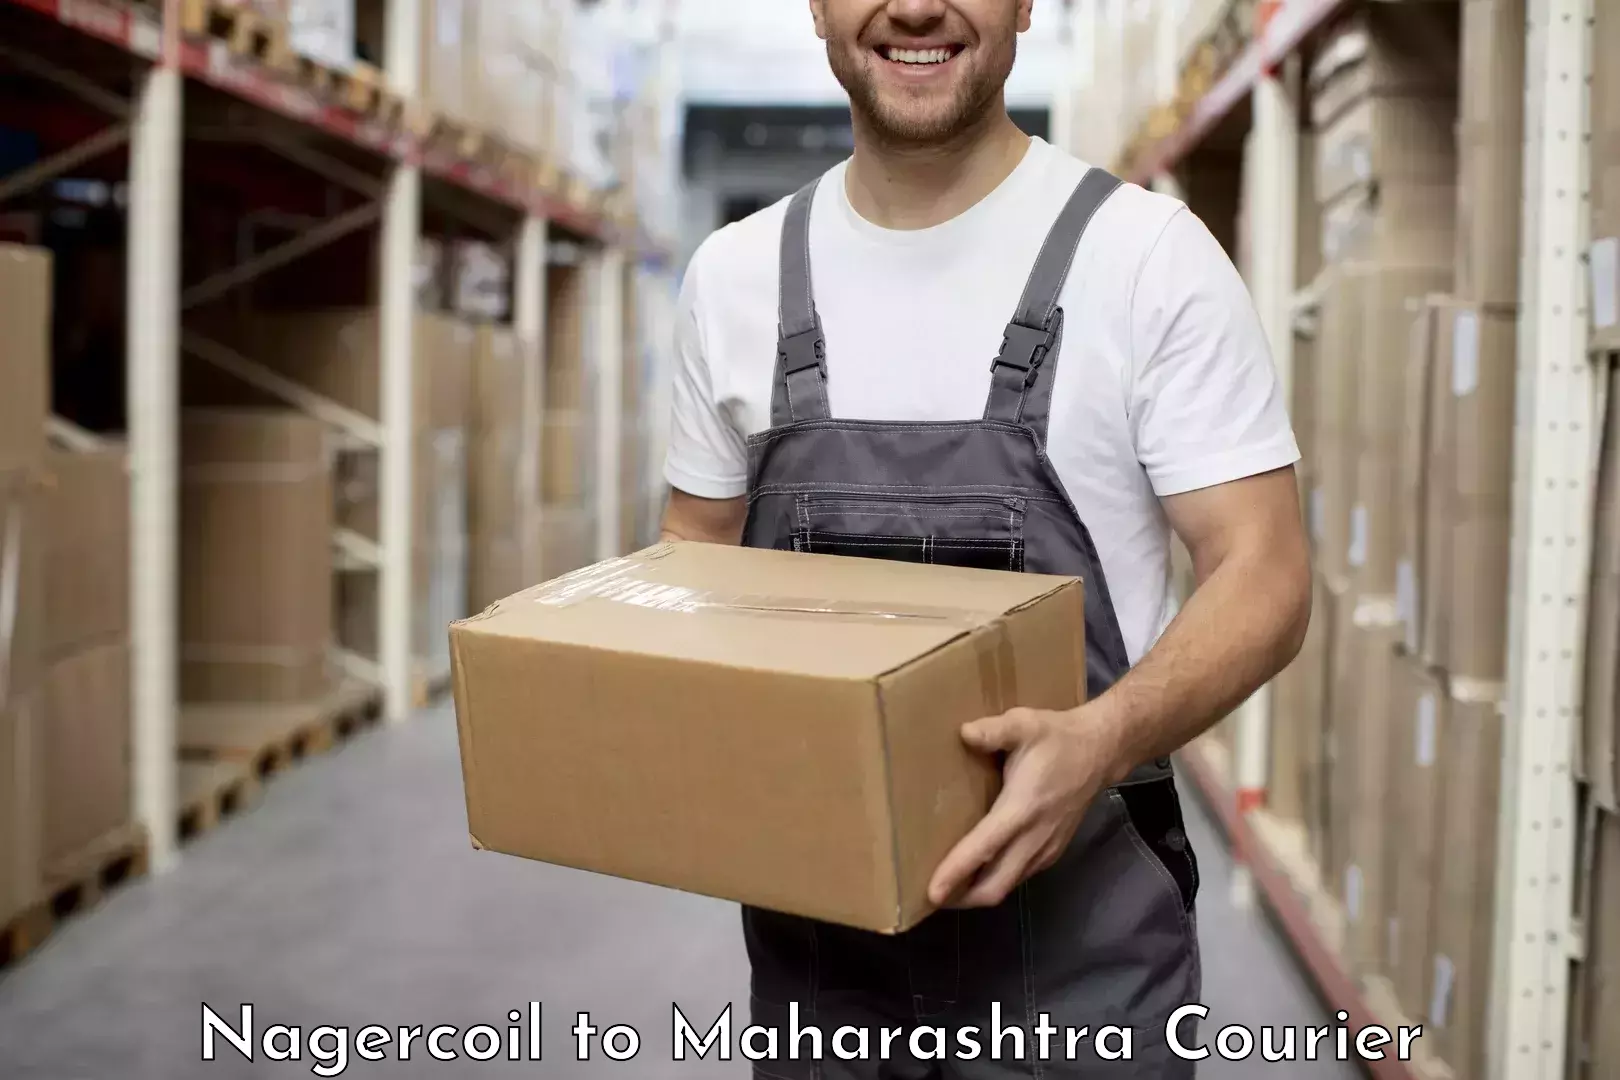 Reliable parcel services in Nagercoil to Walchandnagar